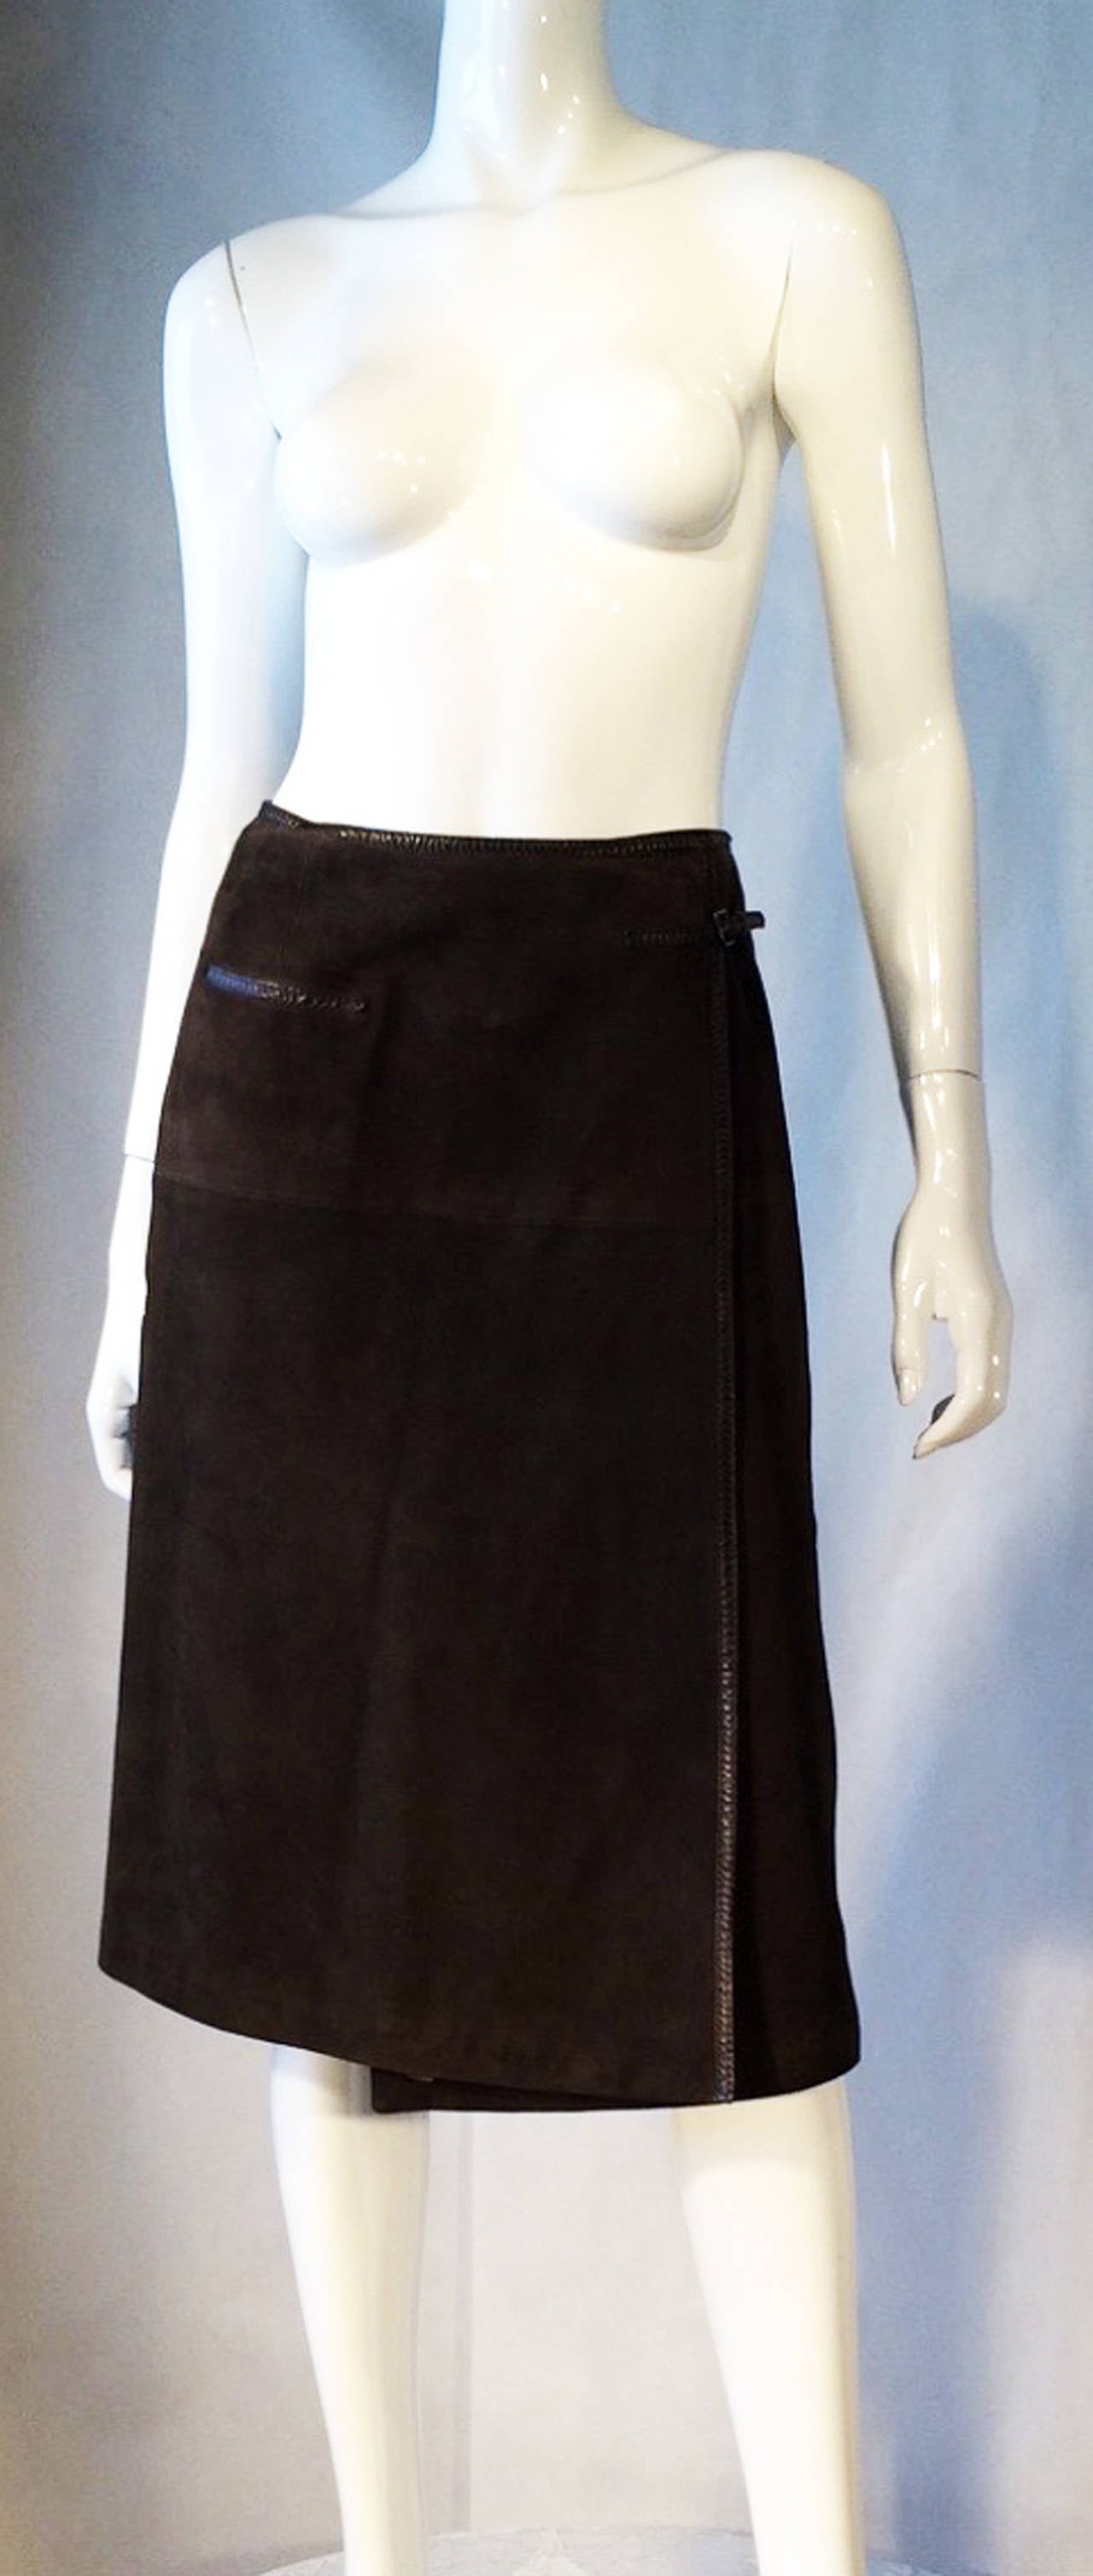 A fine vintage Hermes suede leather wrap skirt. Dark olive dyed suede leather item trimmed in a matching saddle leather trim. Item fully lined and hooks and belts wrap closures. Excellent.